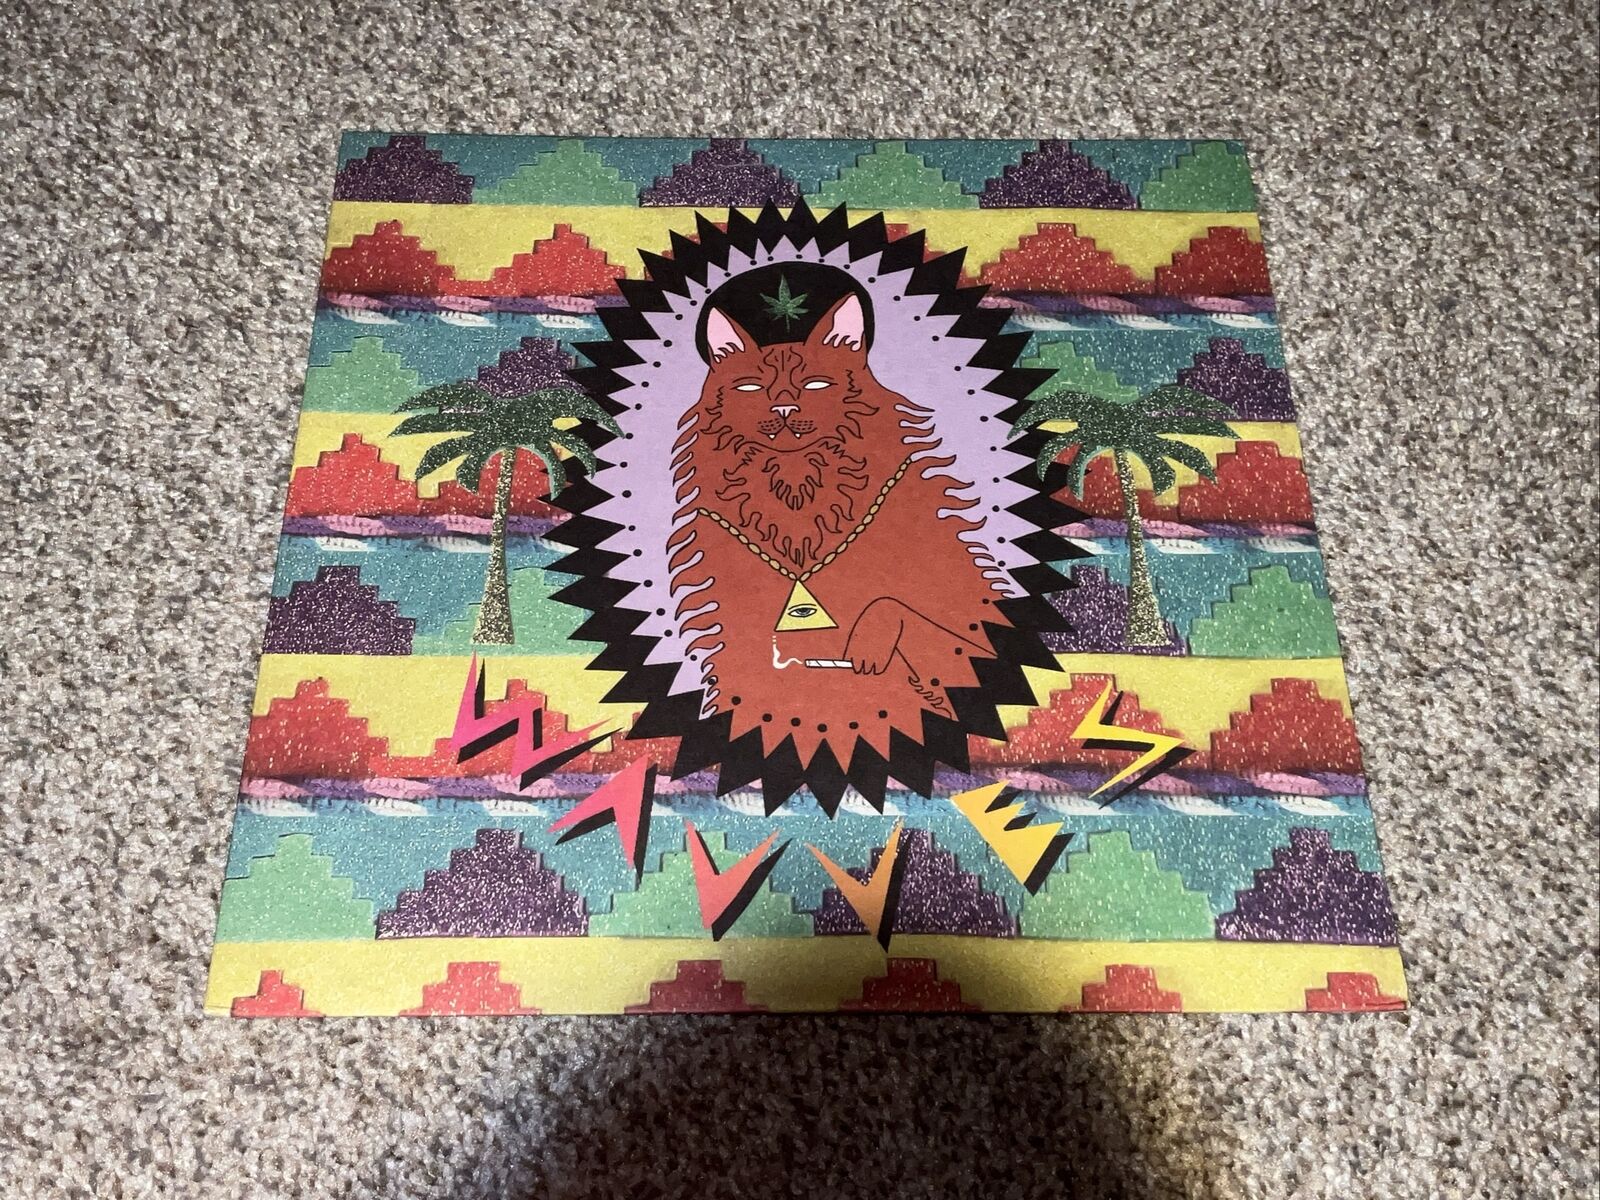 King of the Beach by Wavves (Vinyl, 2010) LP